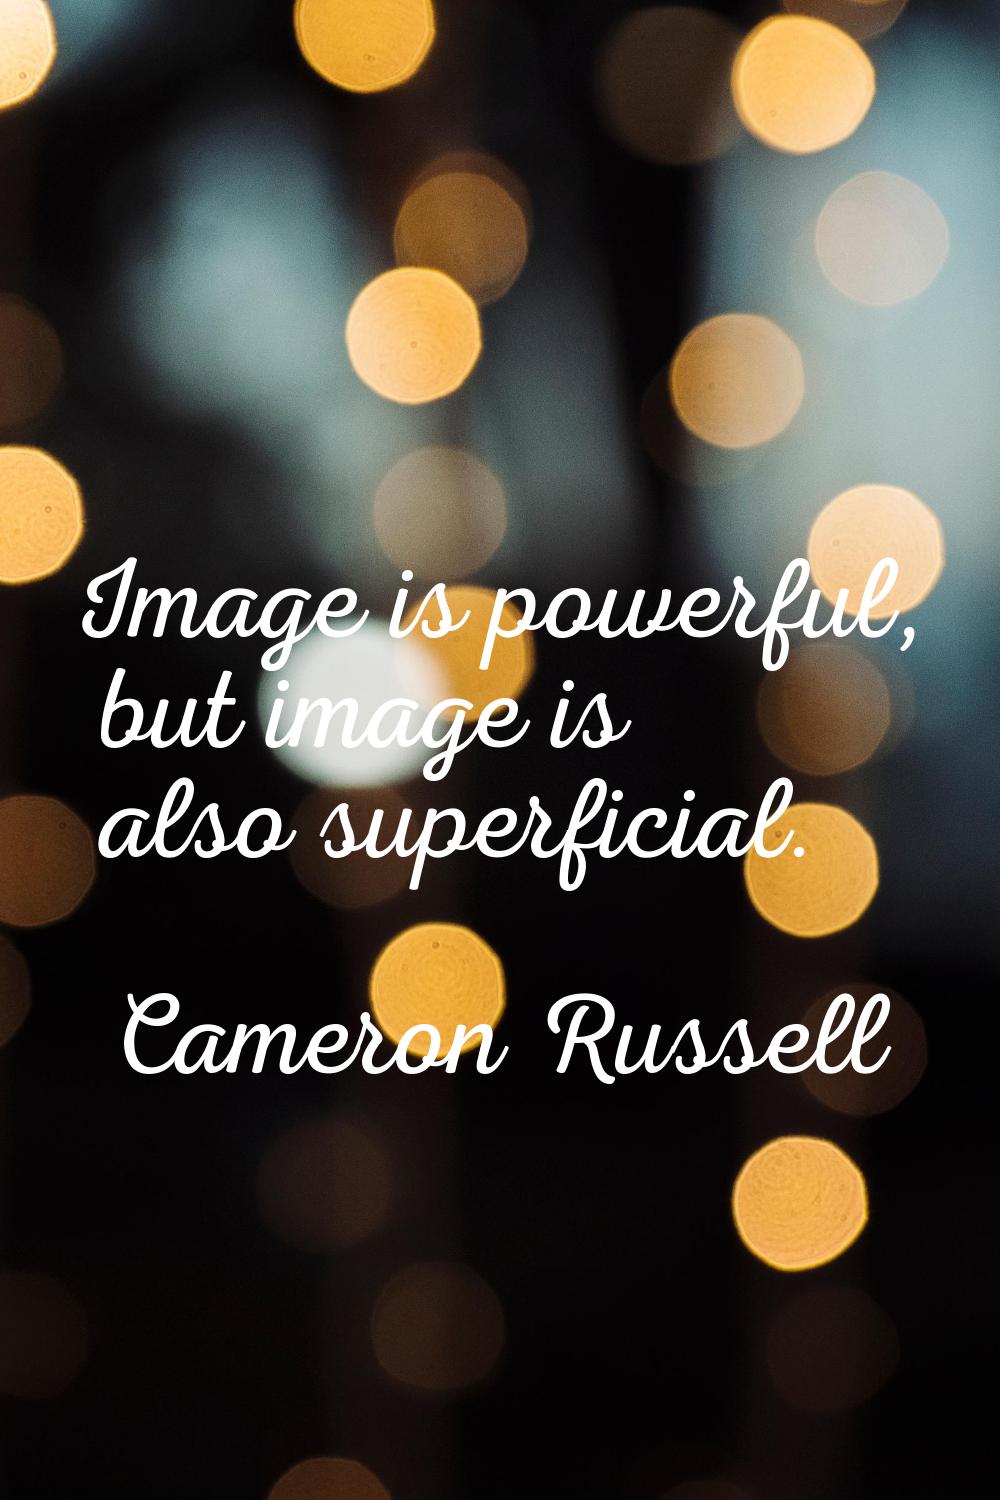 Image is powerful, but image is also superficial.